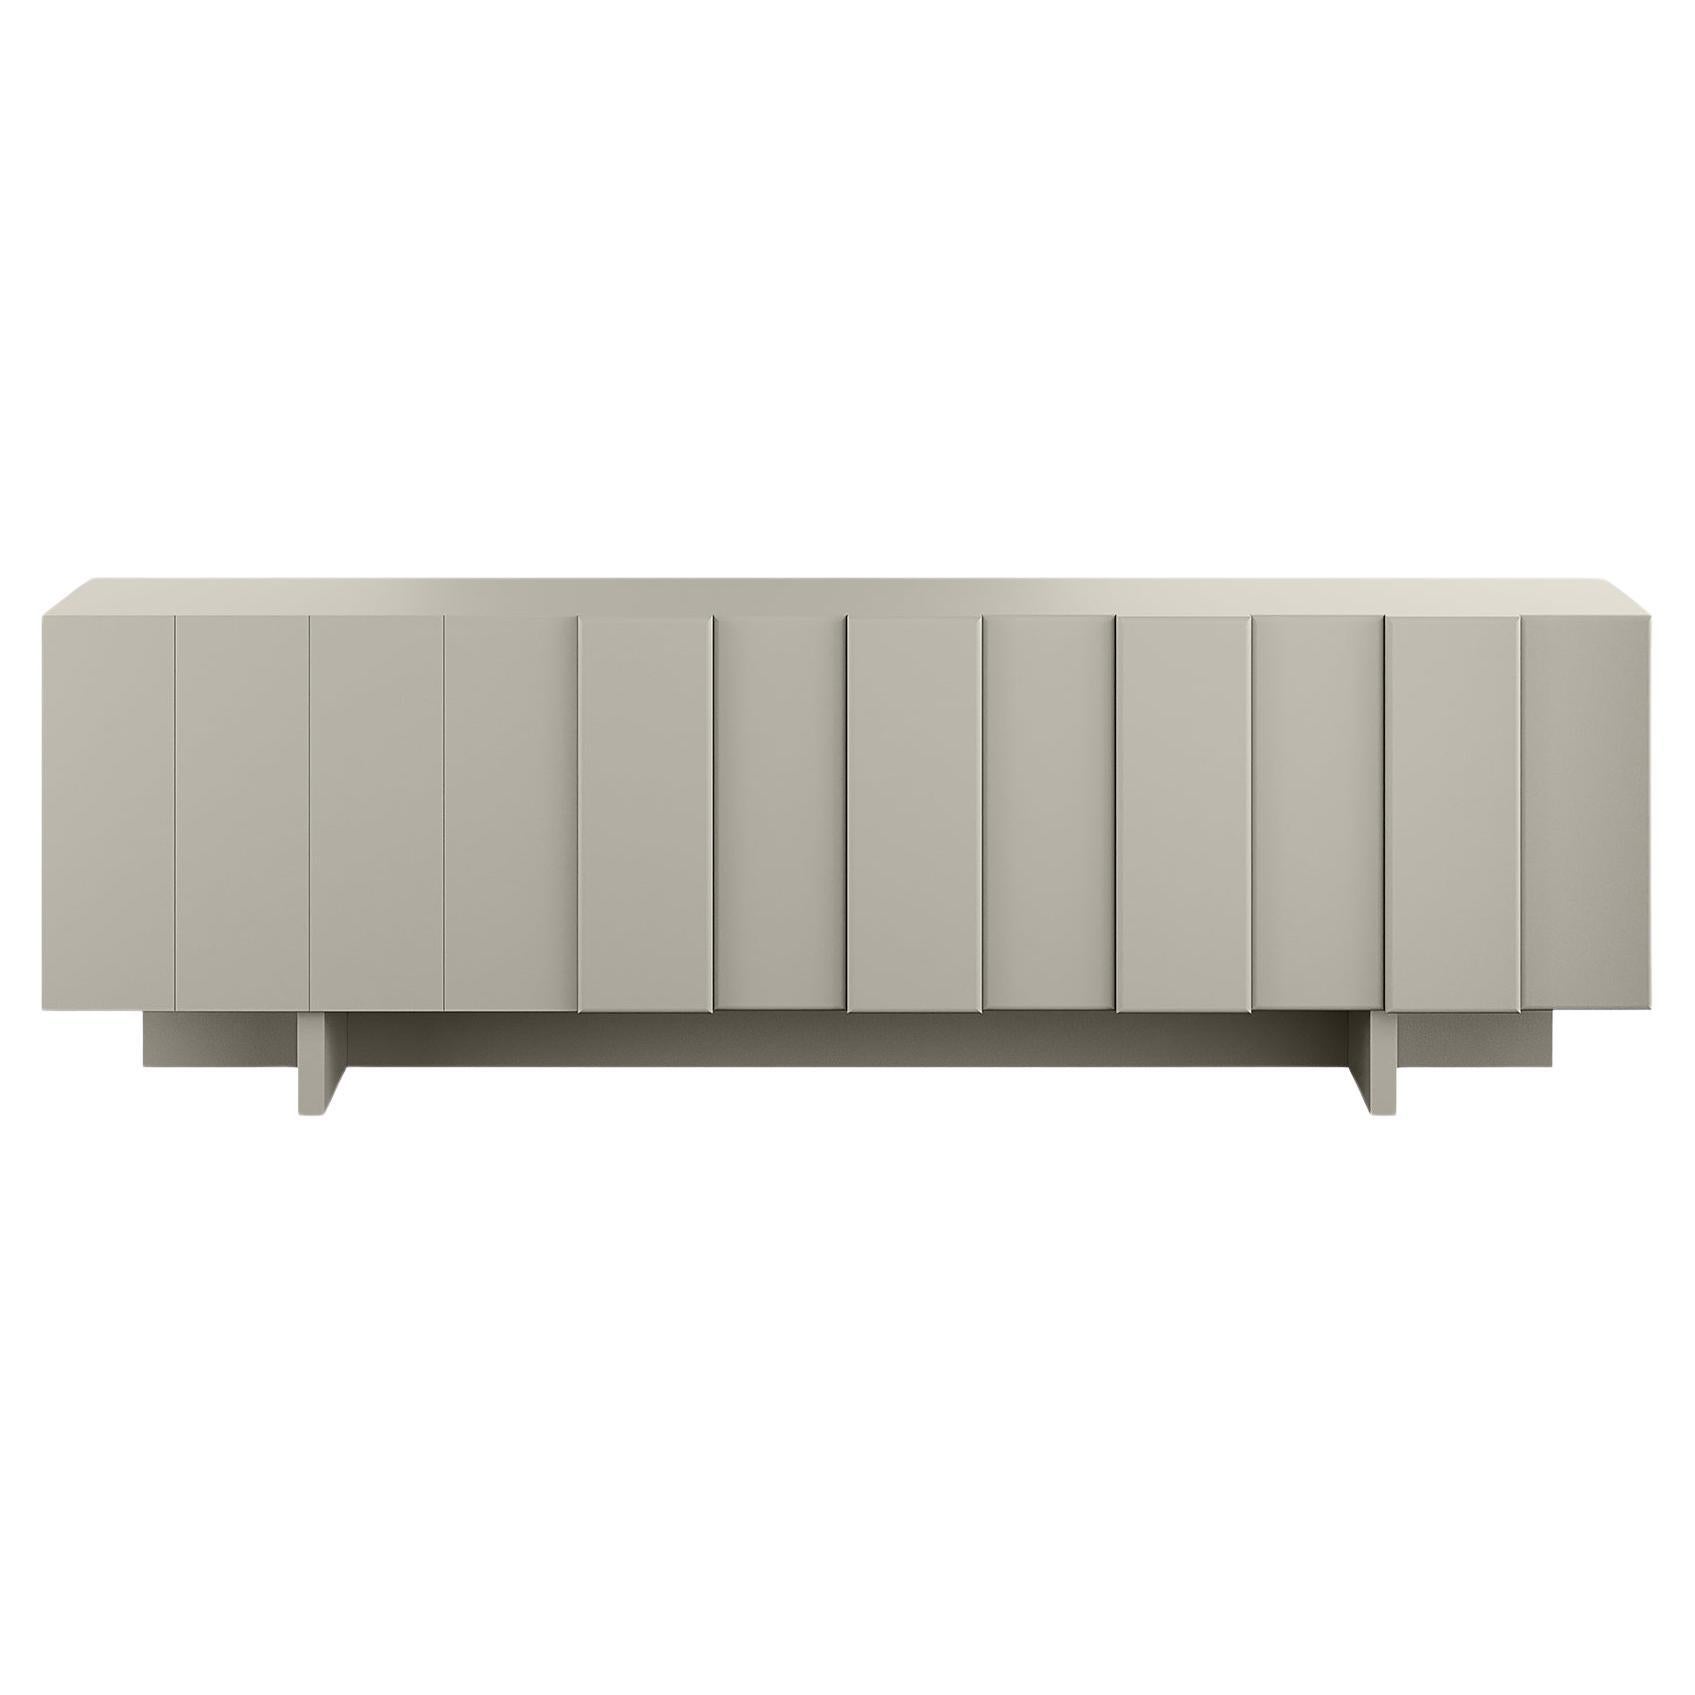 Contemporary Minimal Sideboard 3 Doors Wood Beige Mate Lacquer